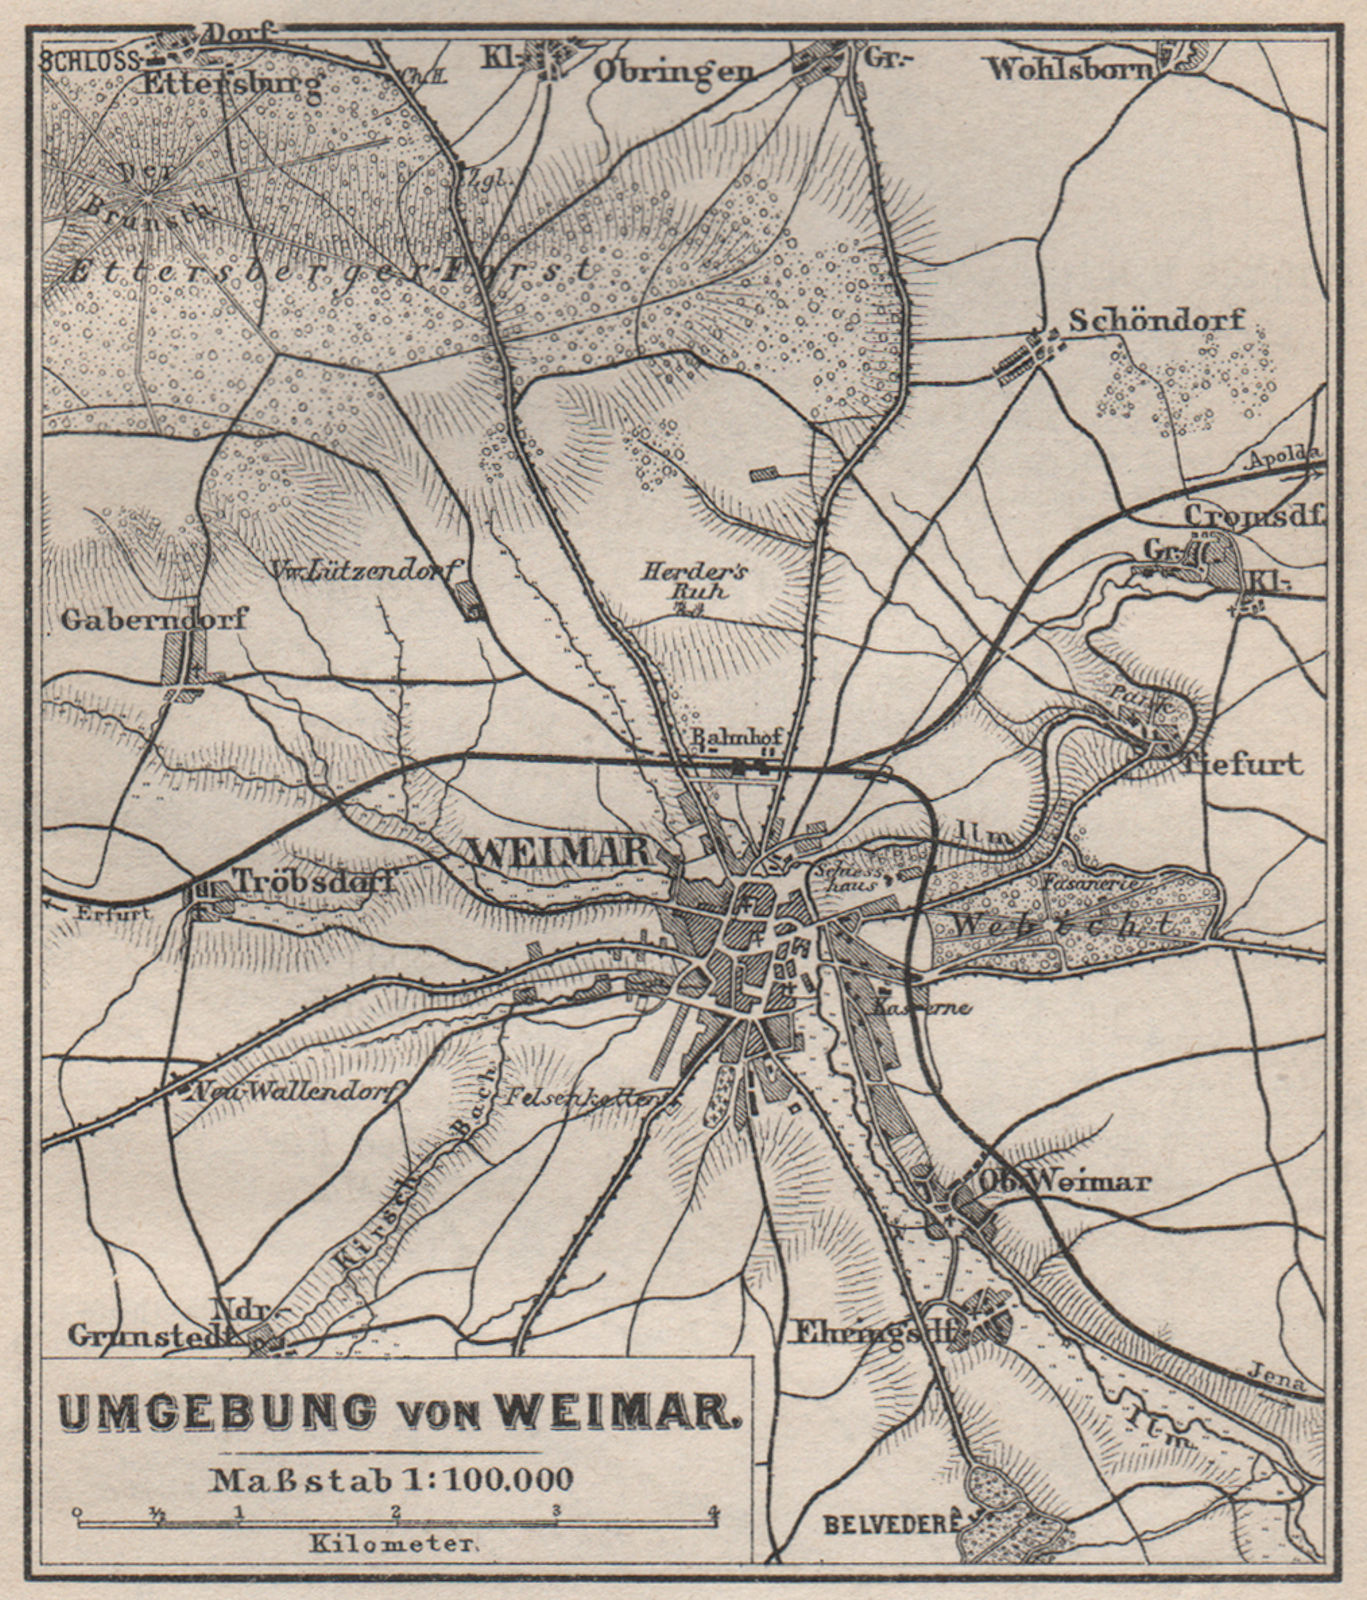 Associate Product WEIMAR umgebung / environs. Thuringia karte. BAEDEKER. SMALL 1886 old map